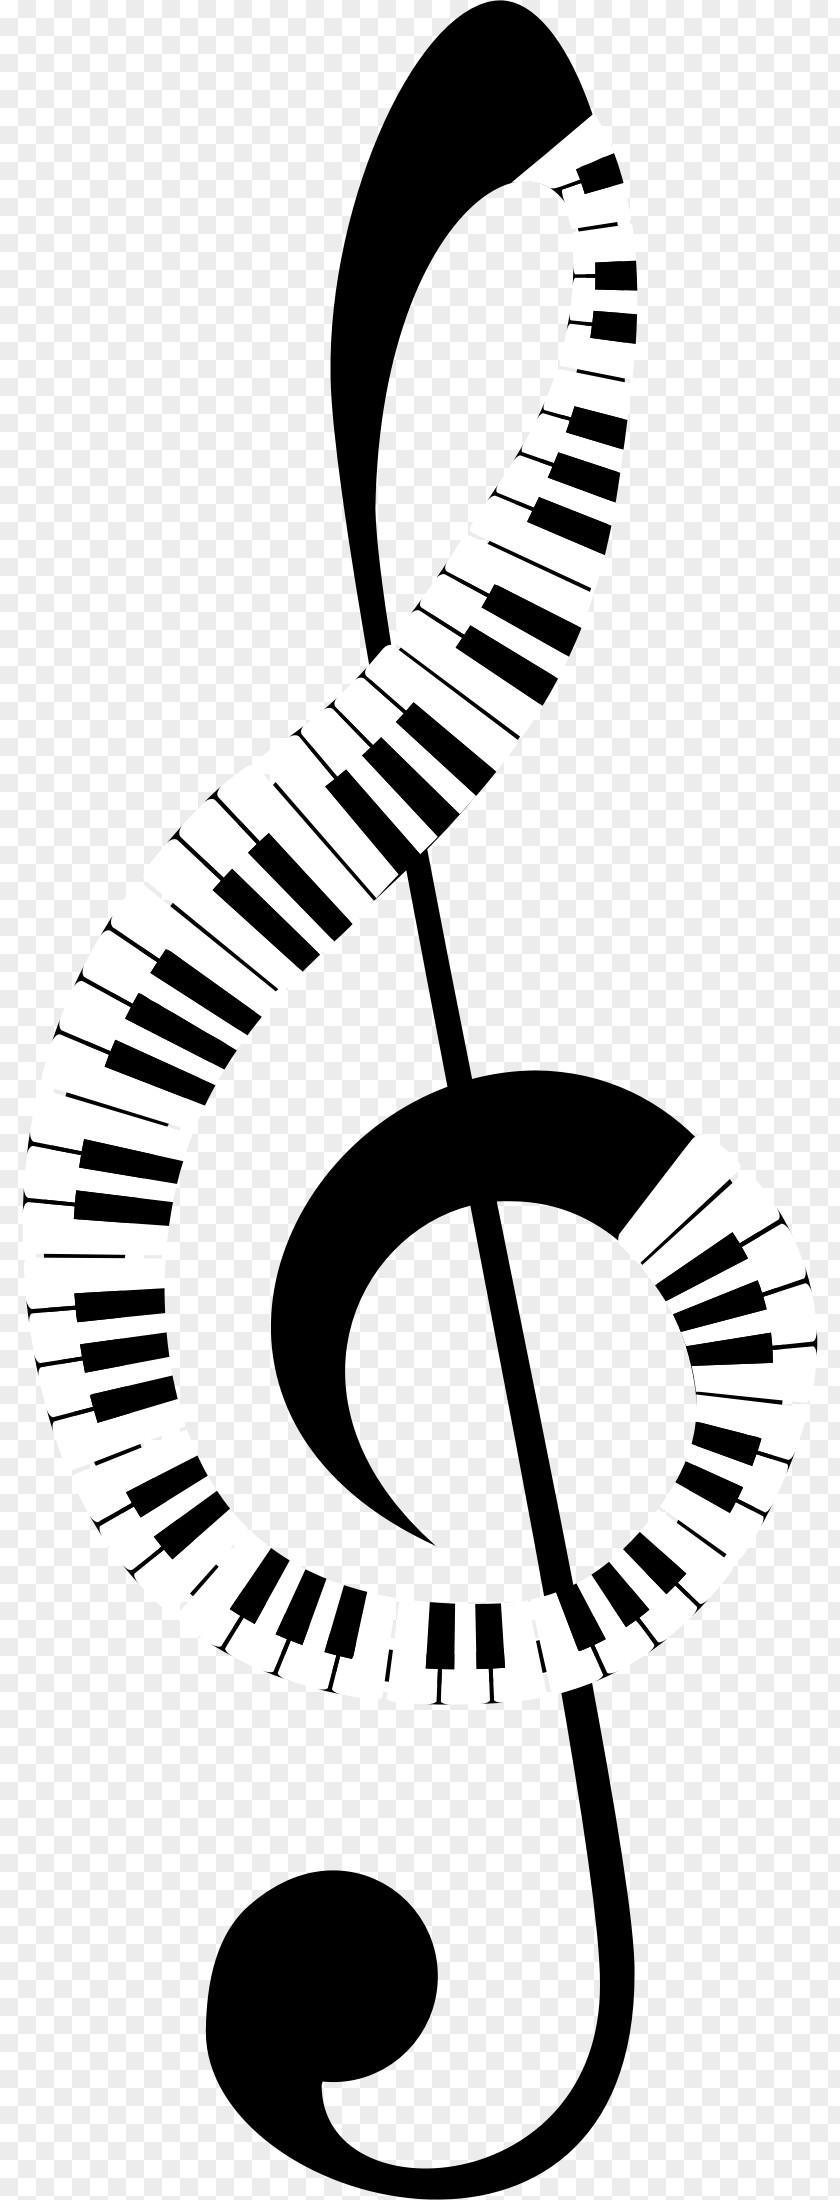 Bass Computer Keyboard Clef Treble Musical Note PNG